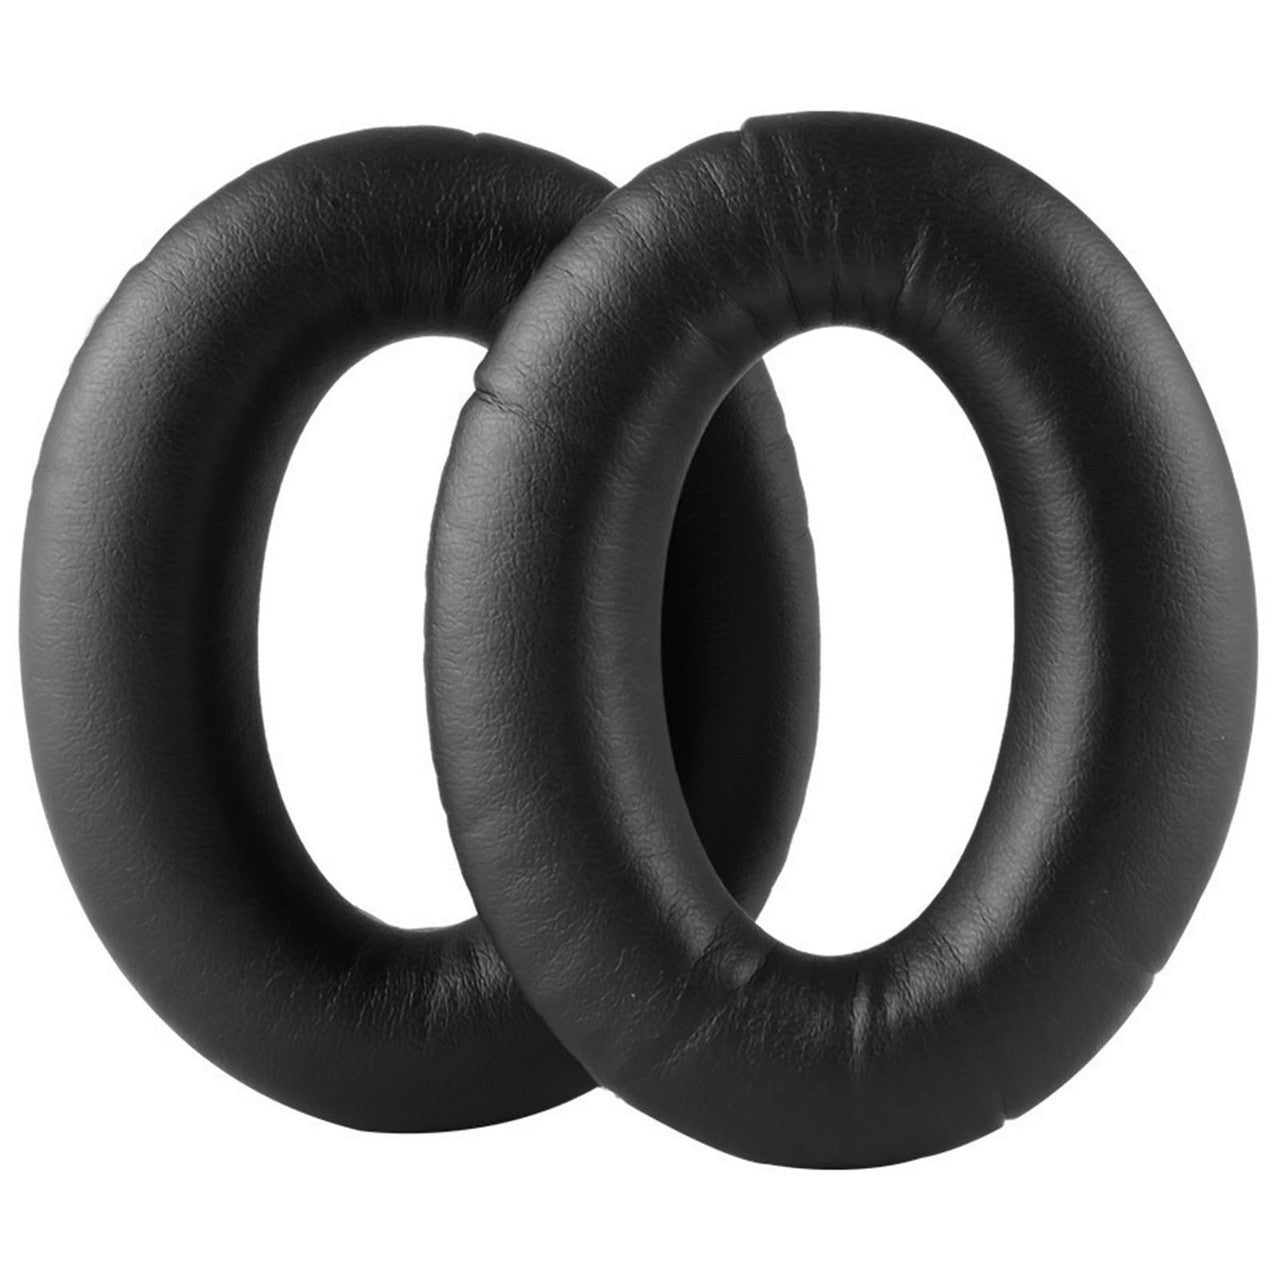 Replacement Ear Pads Earpad Cushion Cup Cover w/ Headband Cushion for Boses QuietComfort QC15 QC2 QC25 Headphone